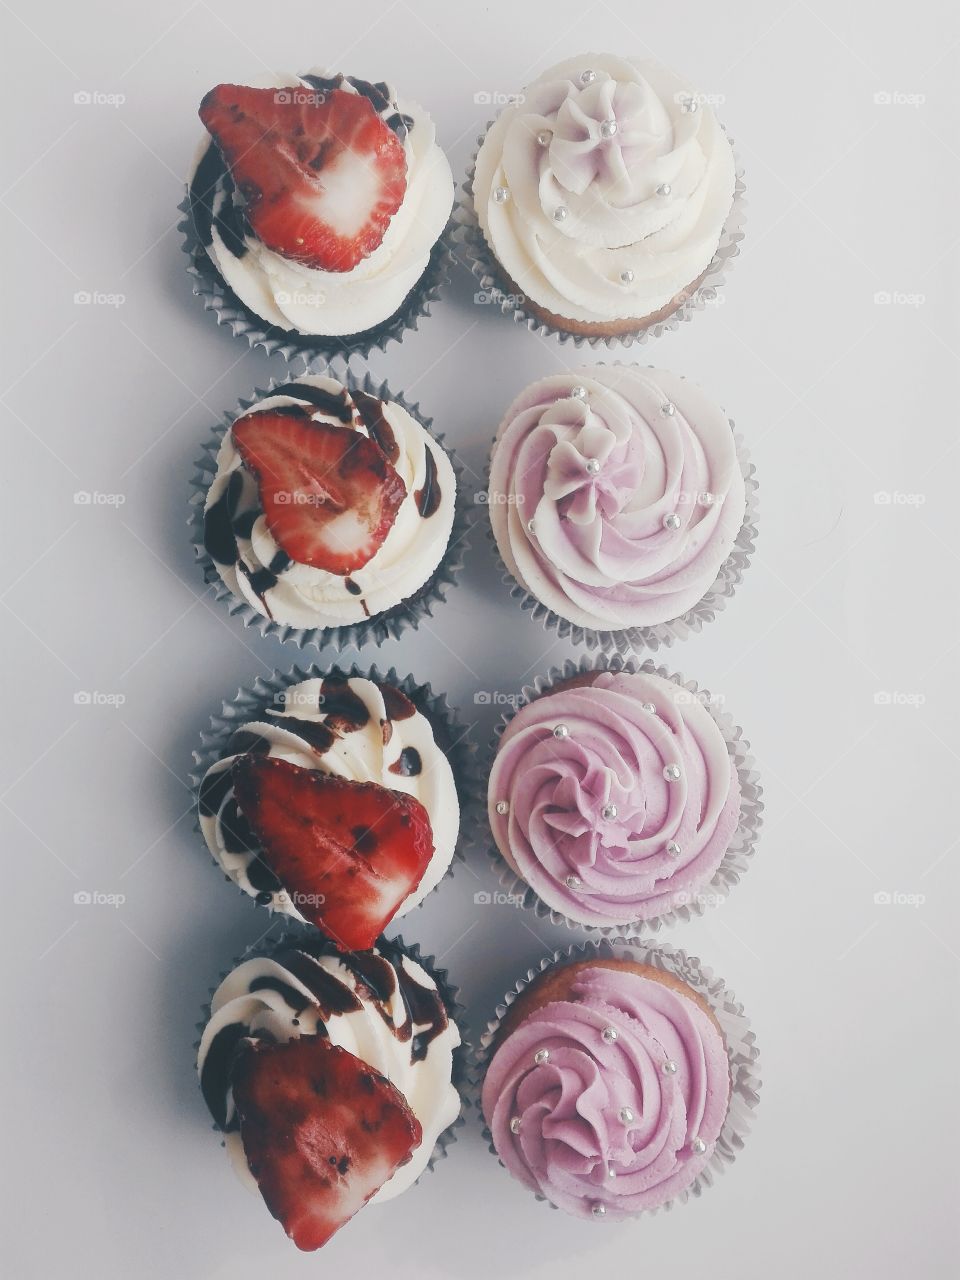 beautiful cupcakes with cream cheese, chocolate and strawberries